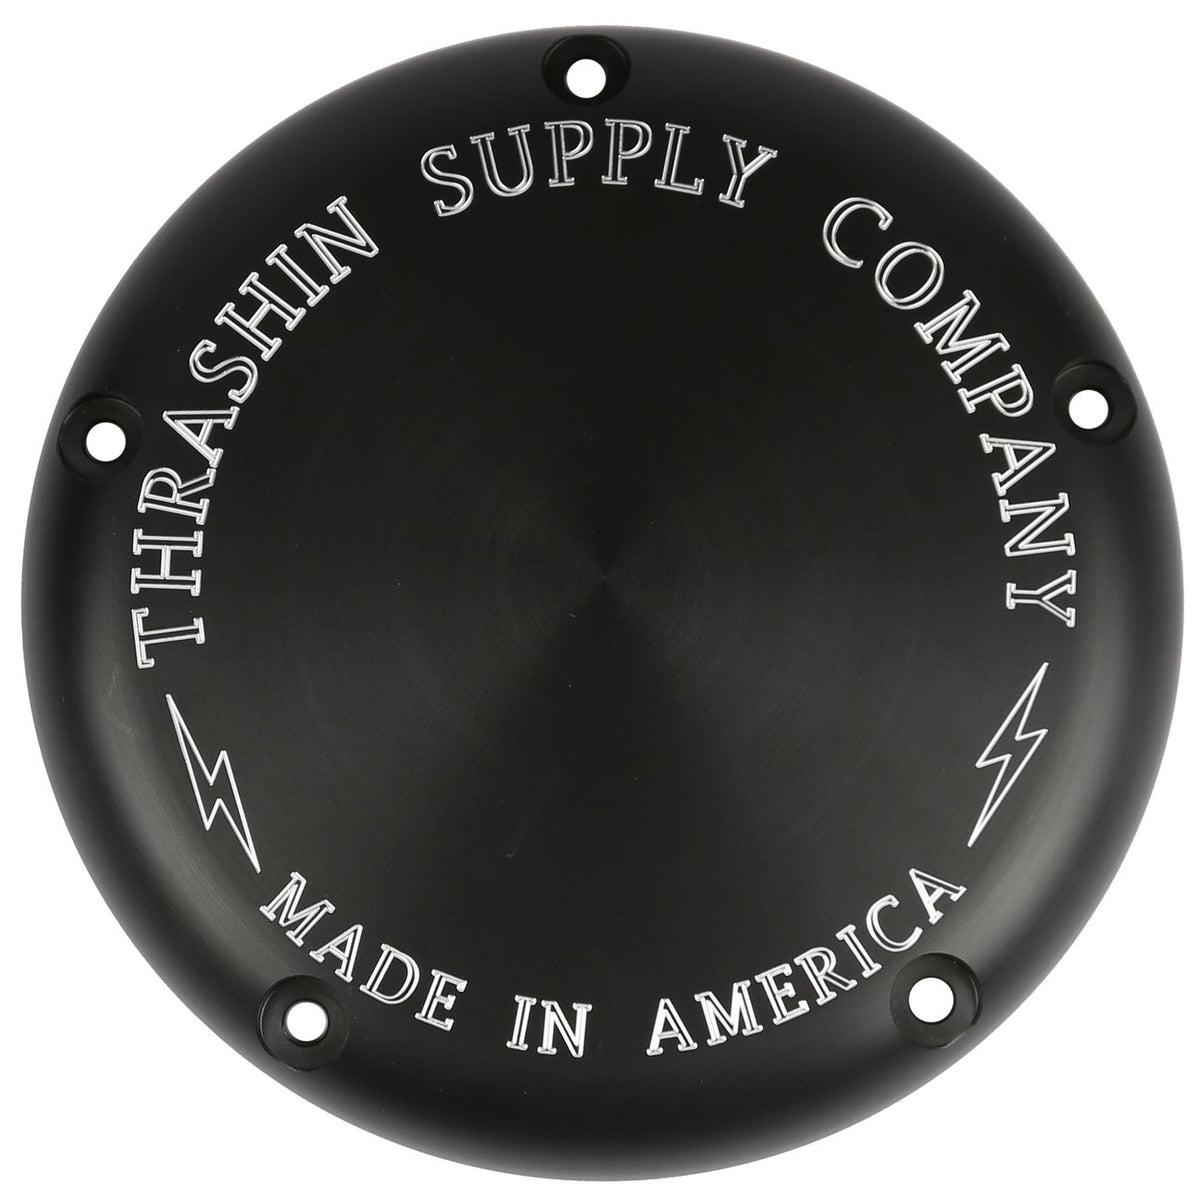 OG 5 Hole Derby Cover - M8 Softail